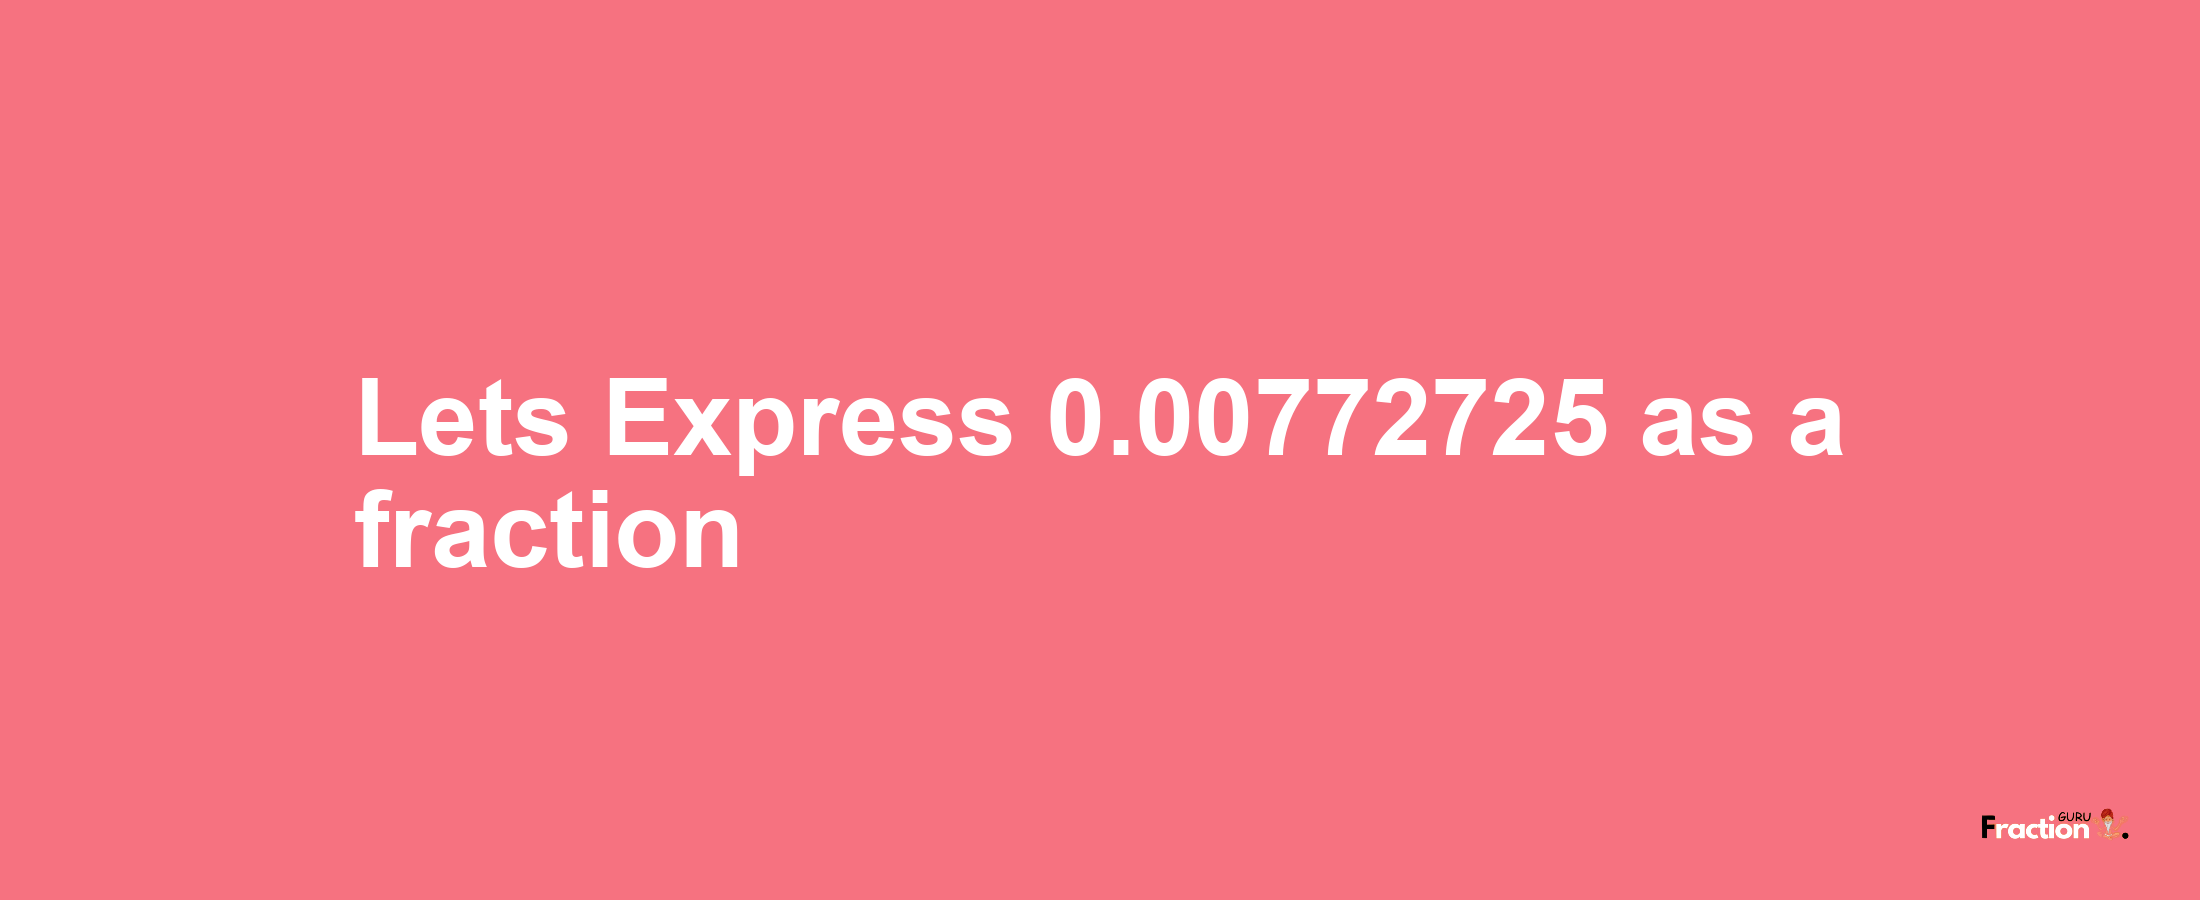 Lets Express 0.00772725 as afraction